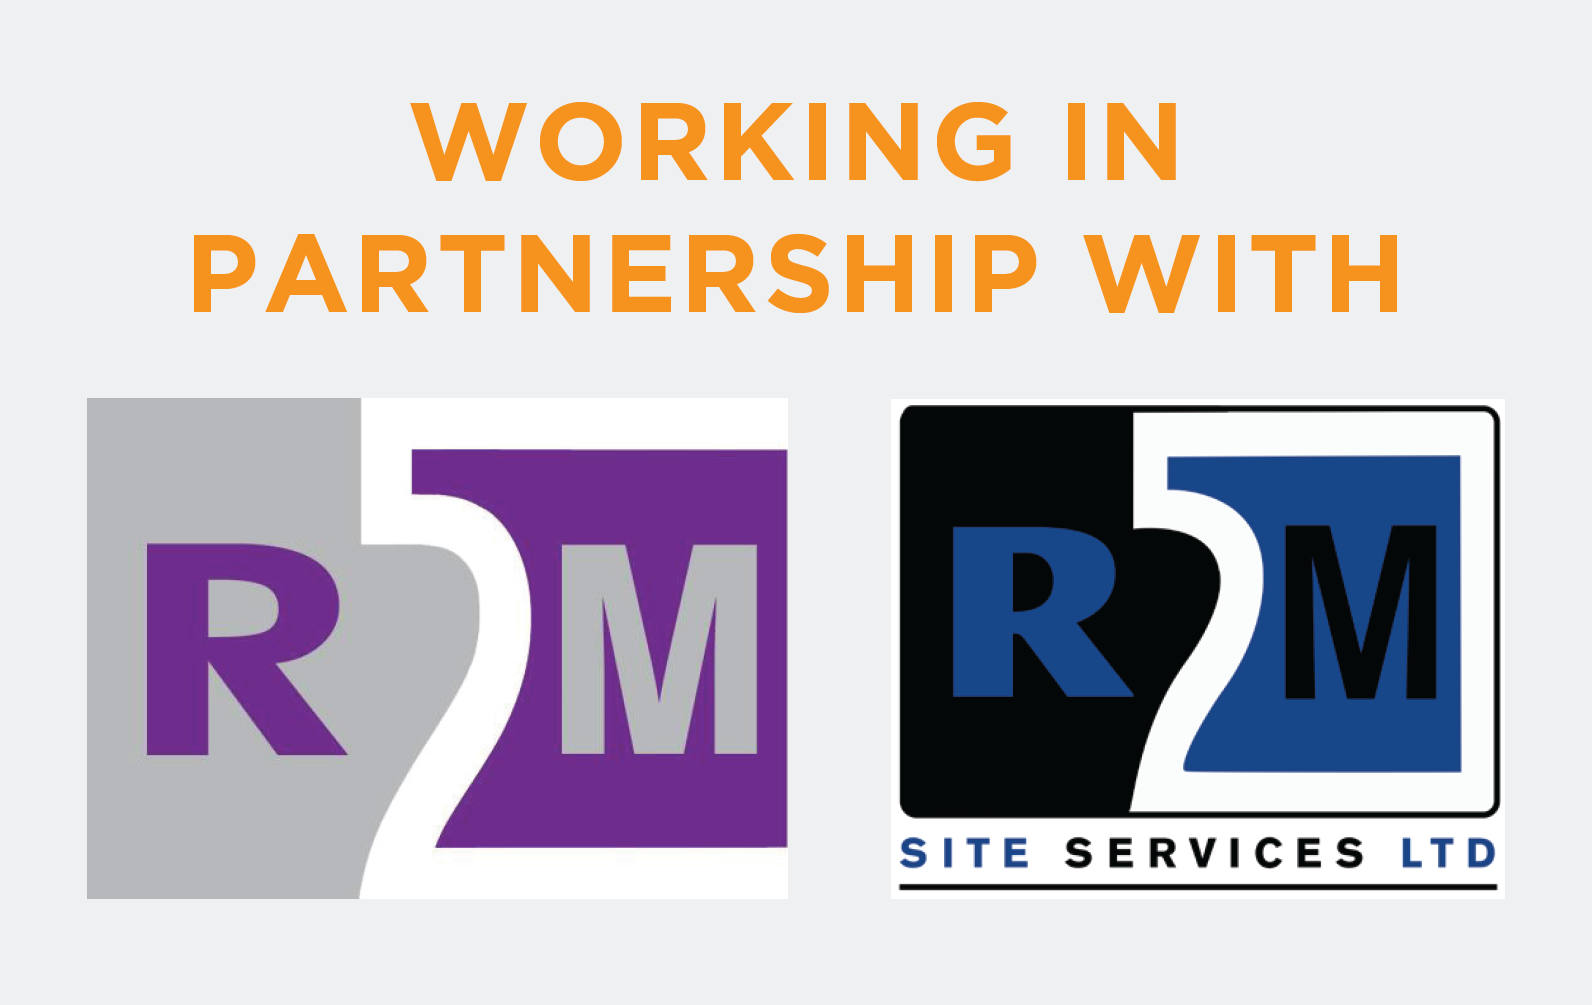 R2M and R2M Site Services